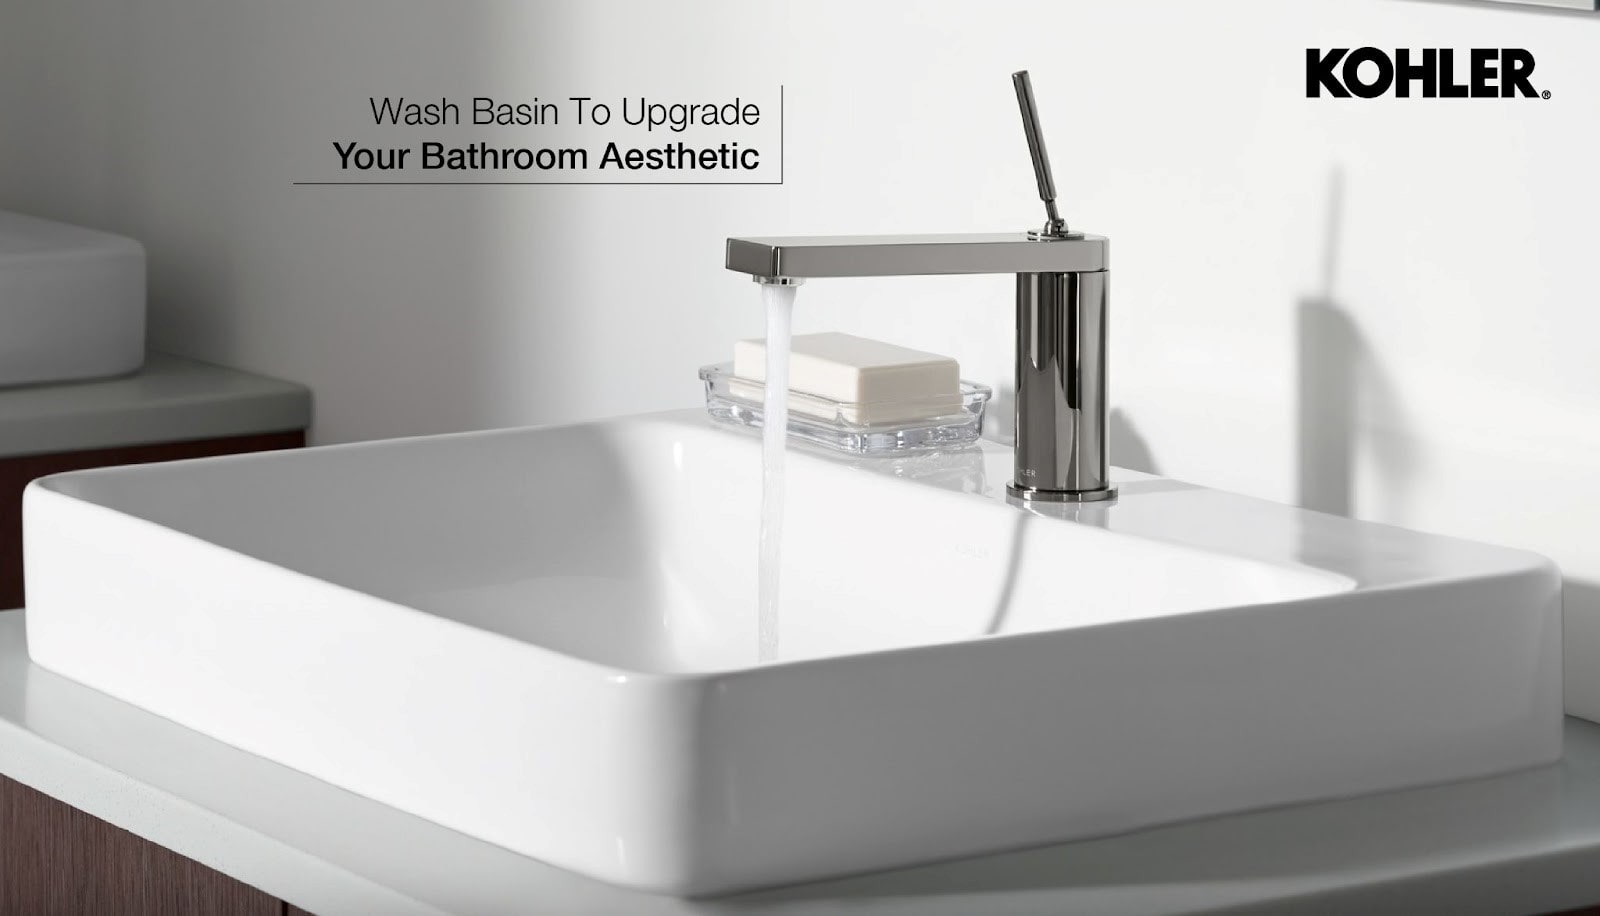 Why Upgrading Your Wash Basin Can Transform Your Bathroom?